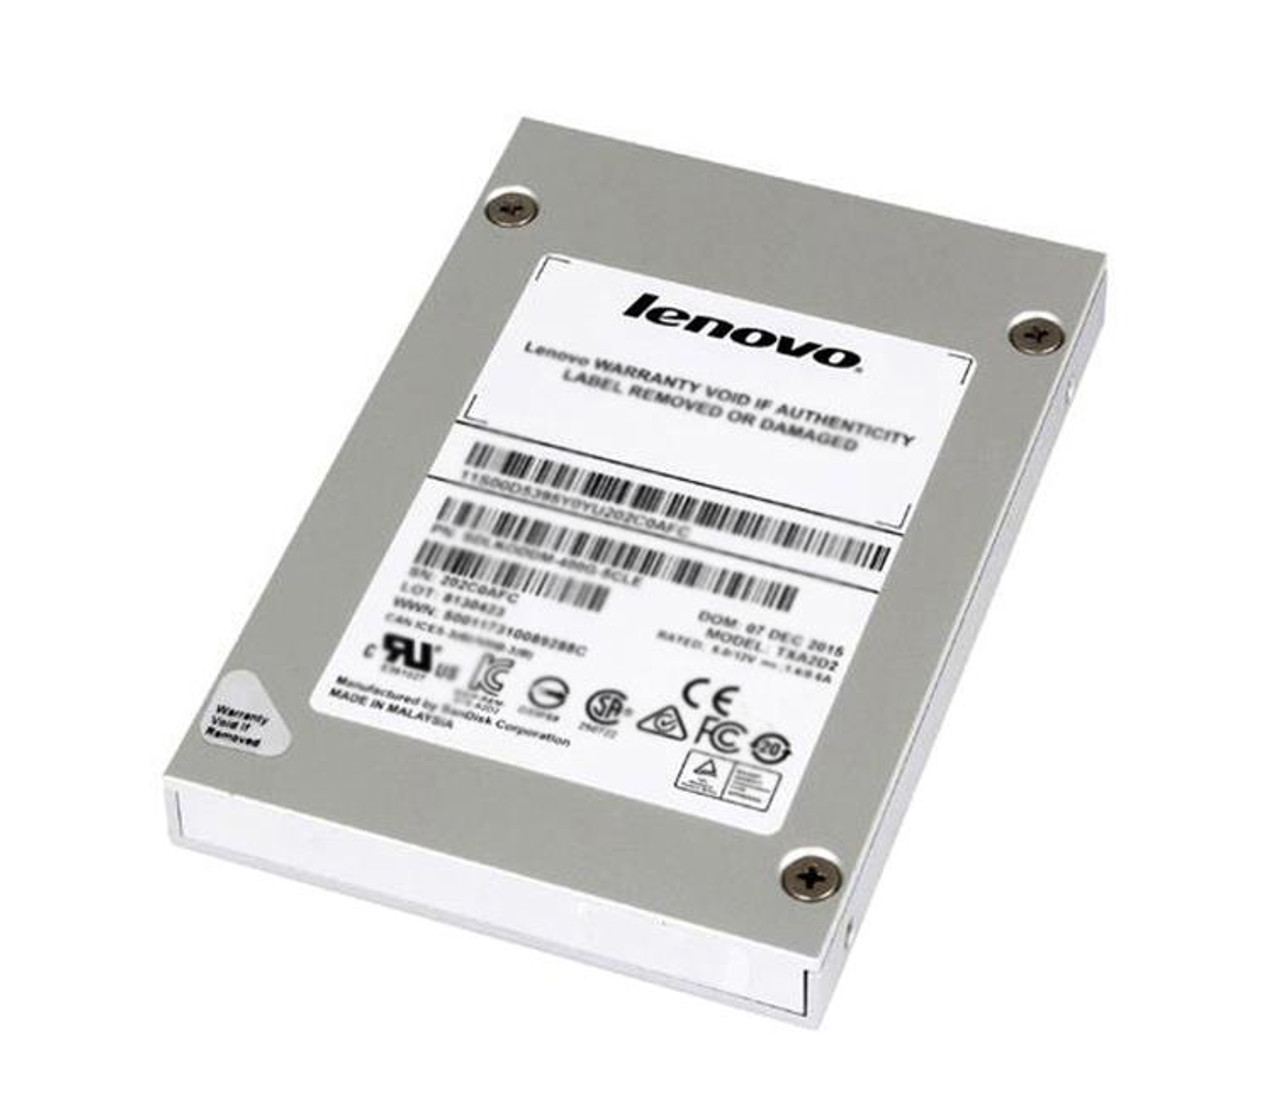 7N47A00113 Lenovo 960GB SATA Gbps Hot Swap 2.5-inch Internal Solid State Drive (SSD) for ThinkSystem